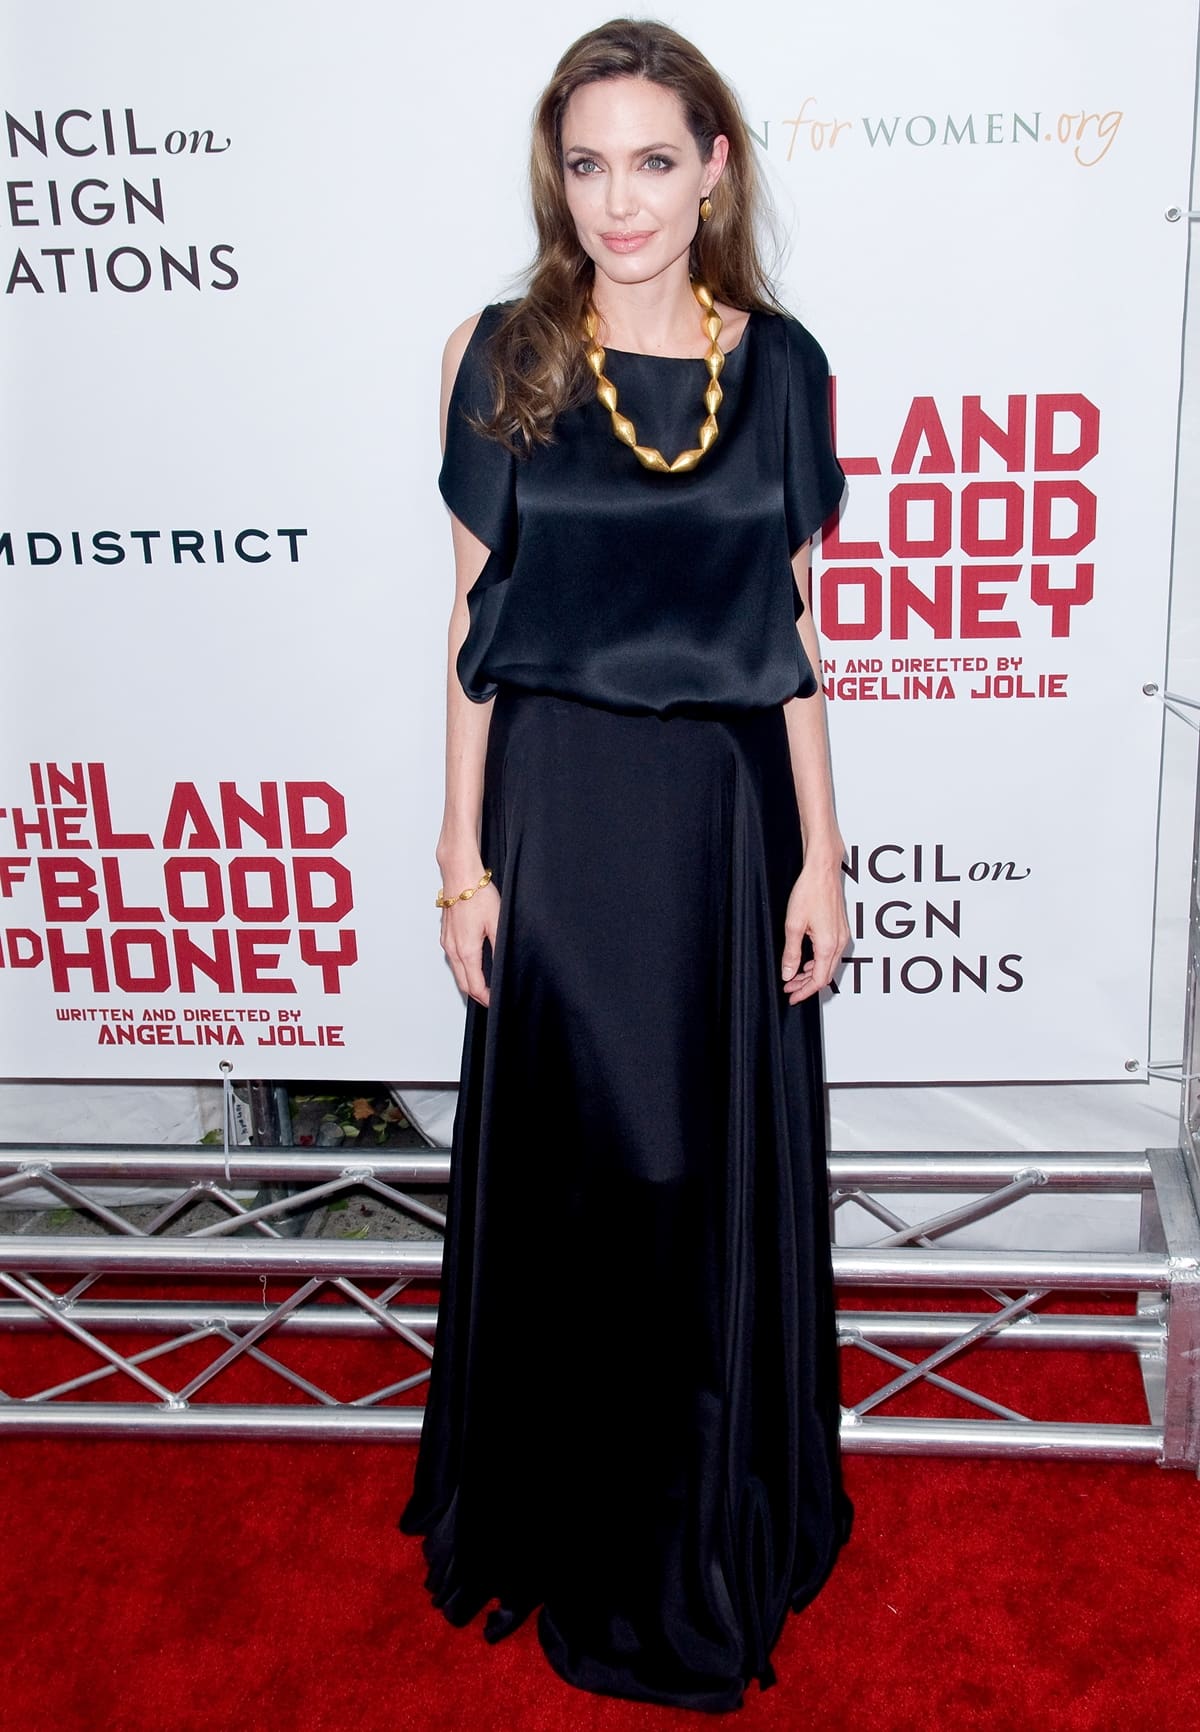 Angelina Jolie wears a black satin cold-shoulder blouse with a black Ralph Lauren maxi skirt and a gold Ofira necklace